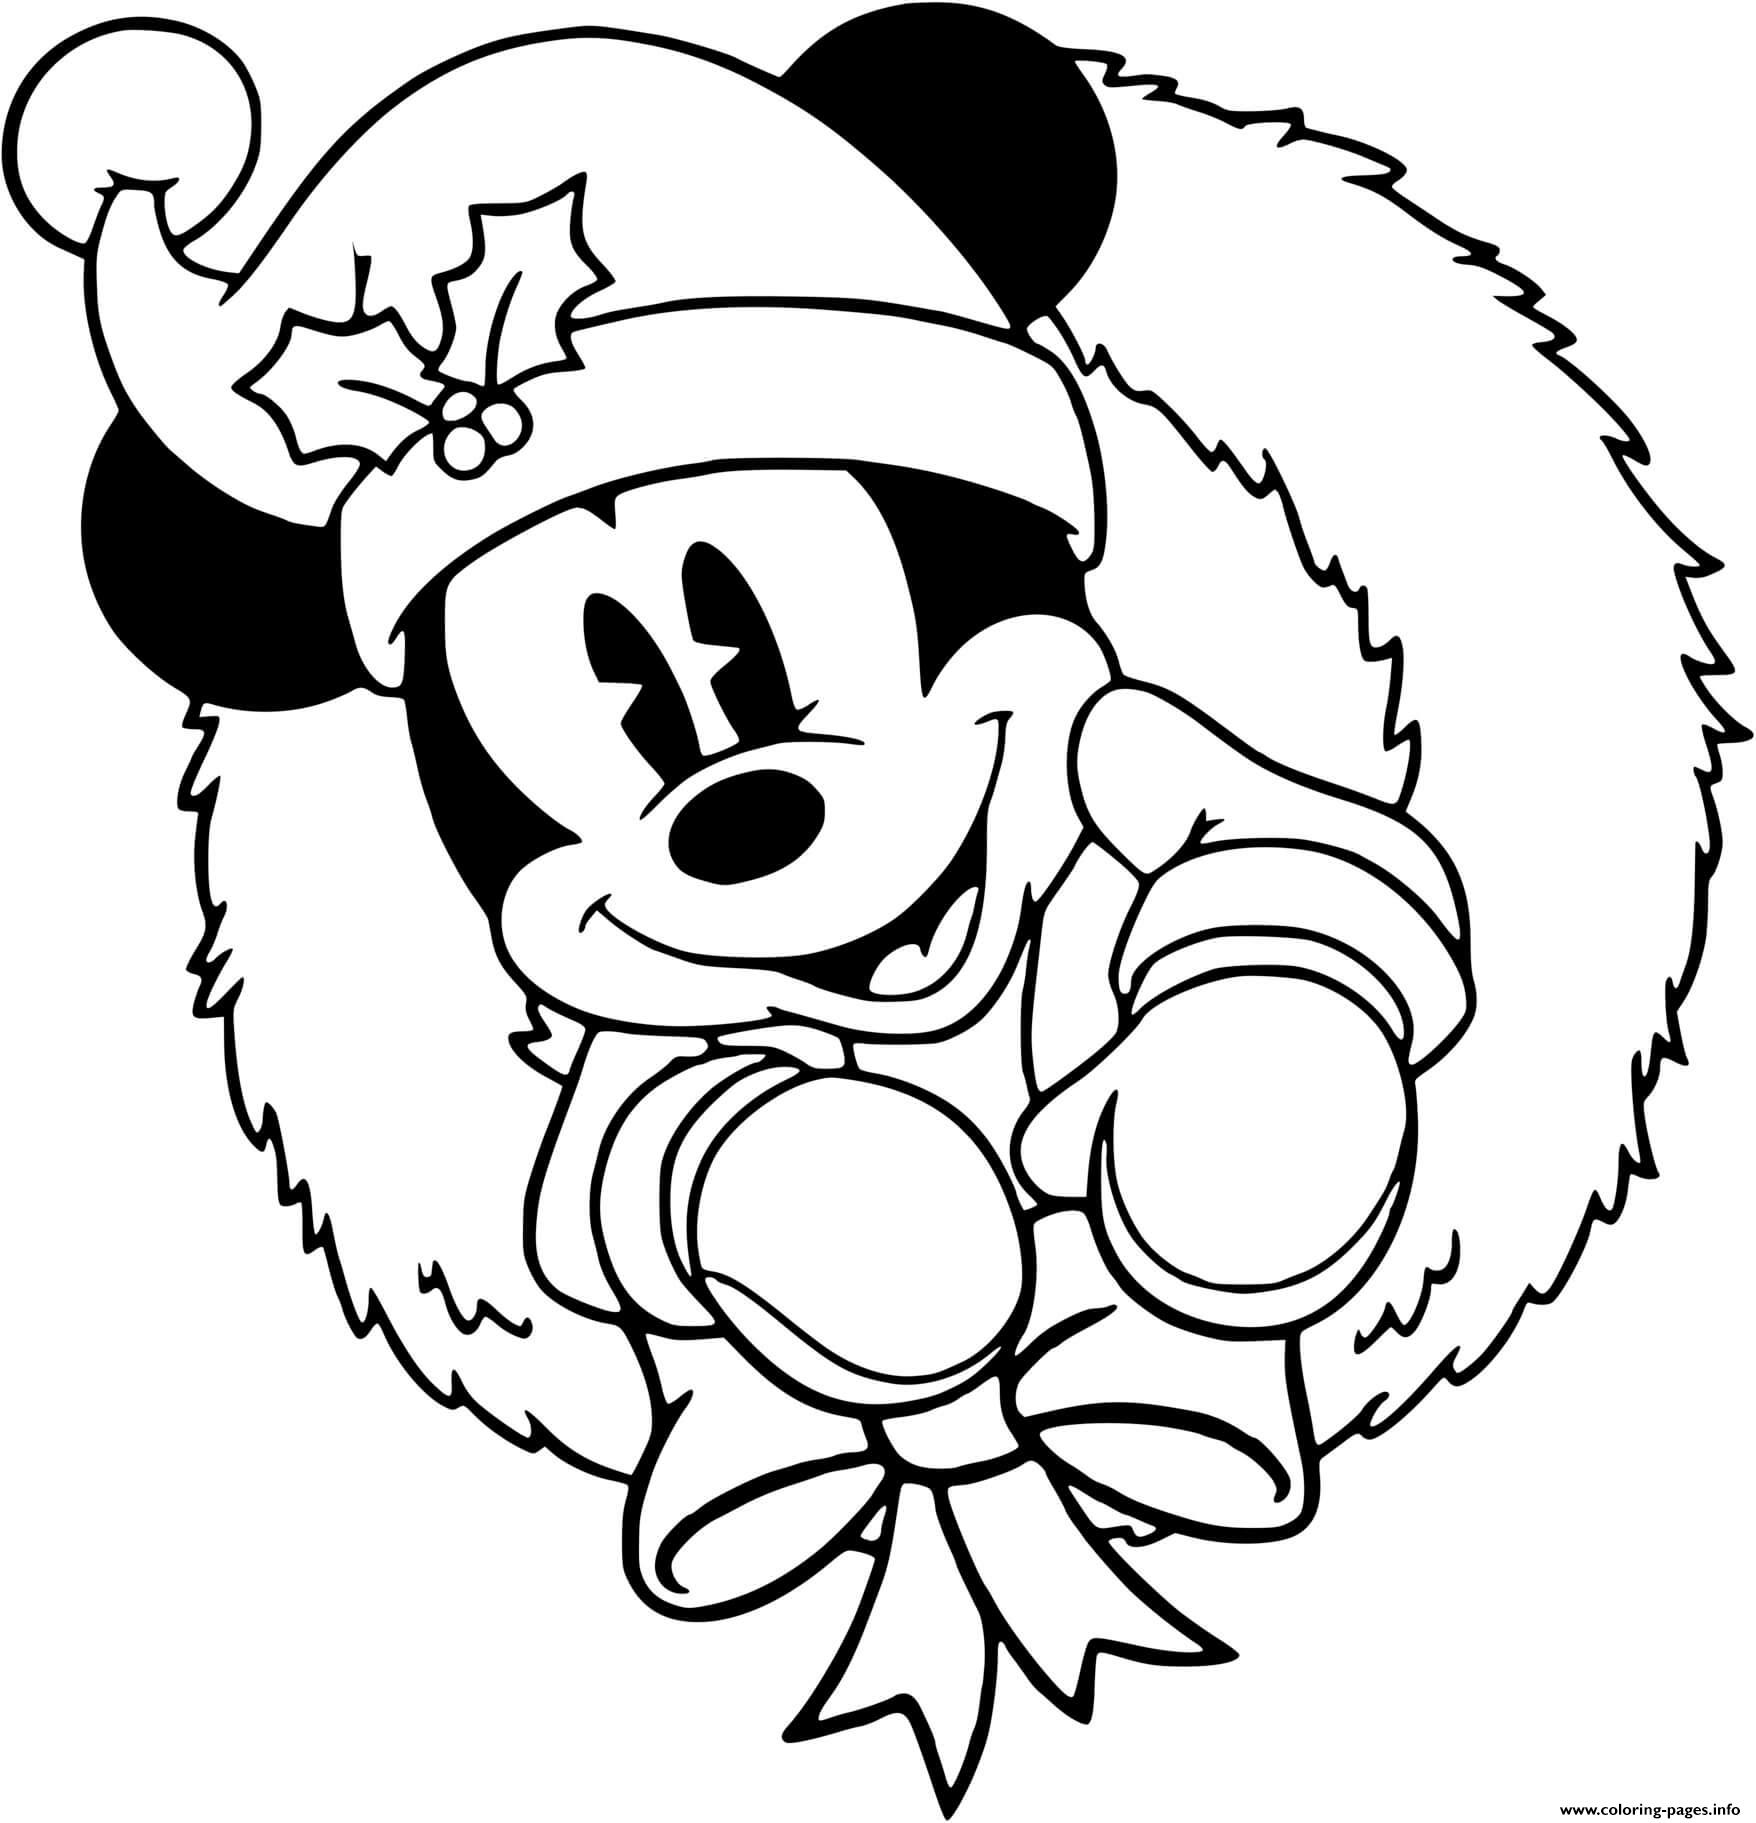 Classic Mickey In A Wreath coloring